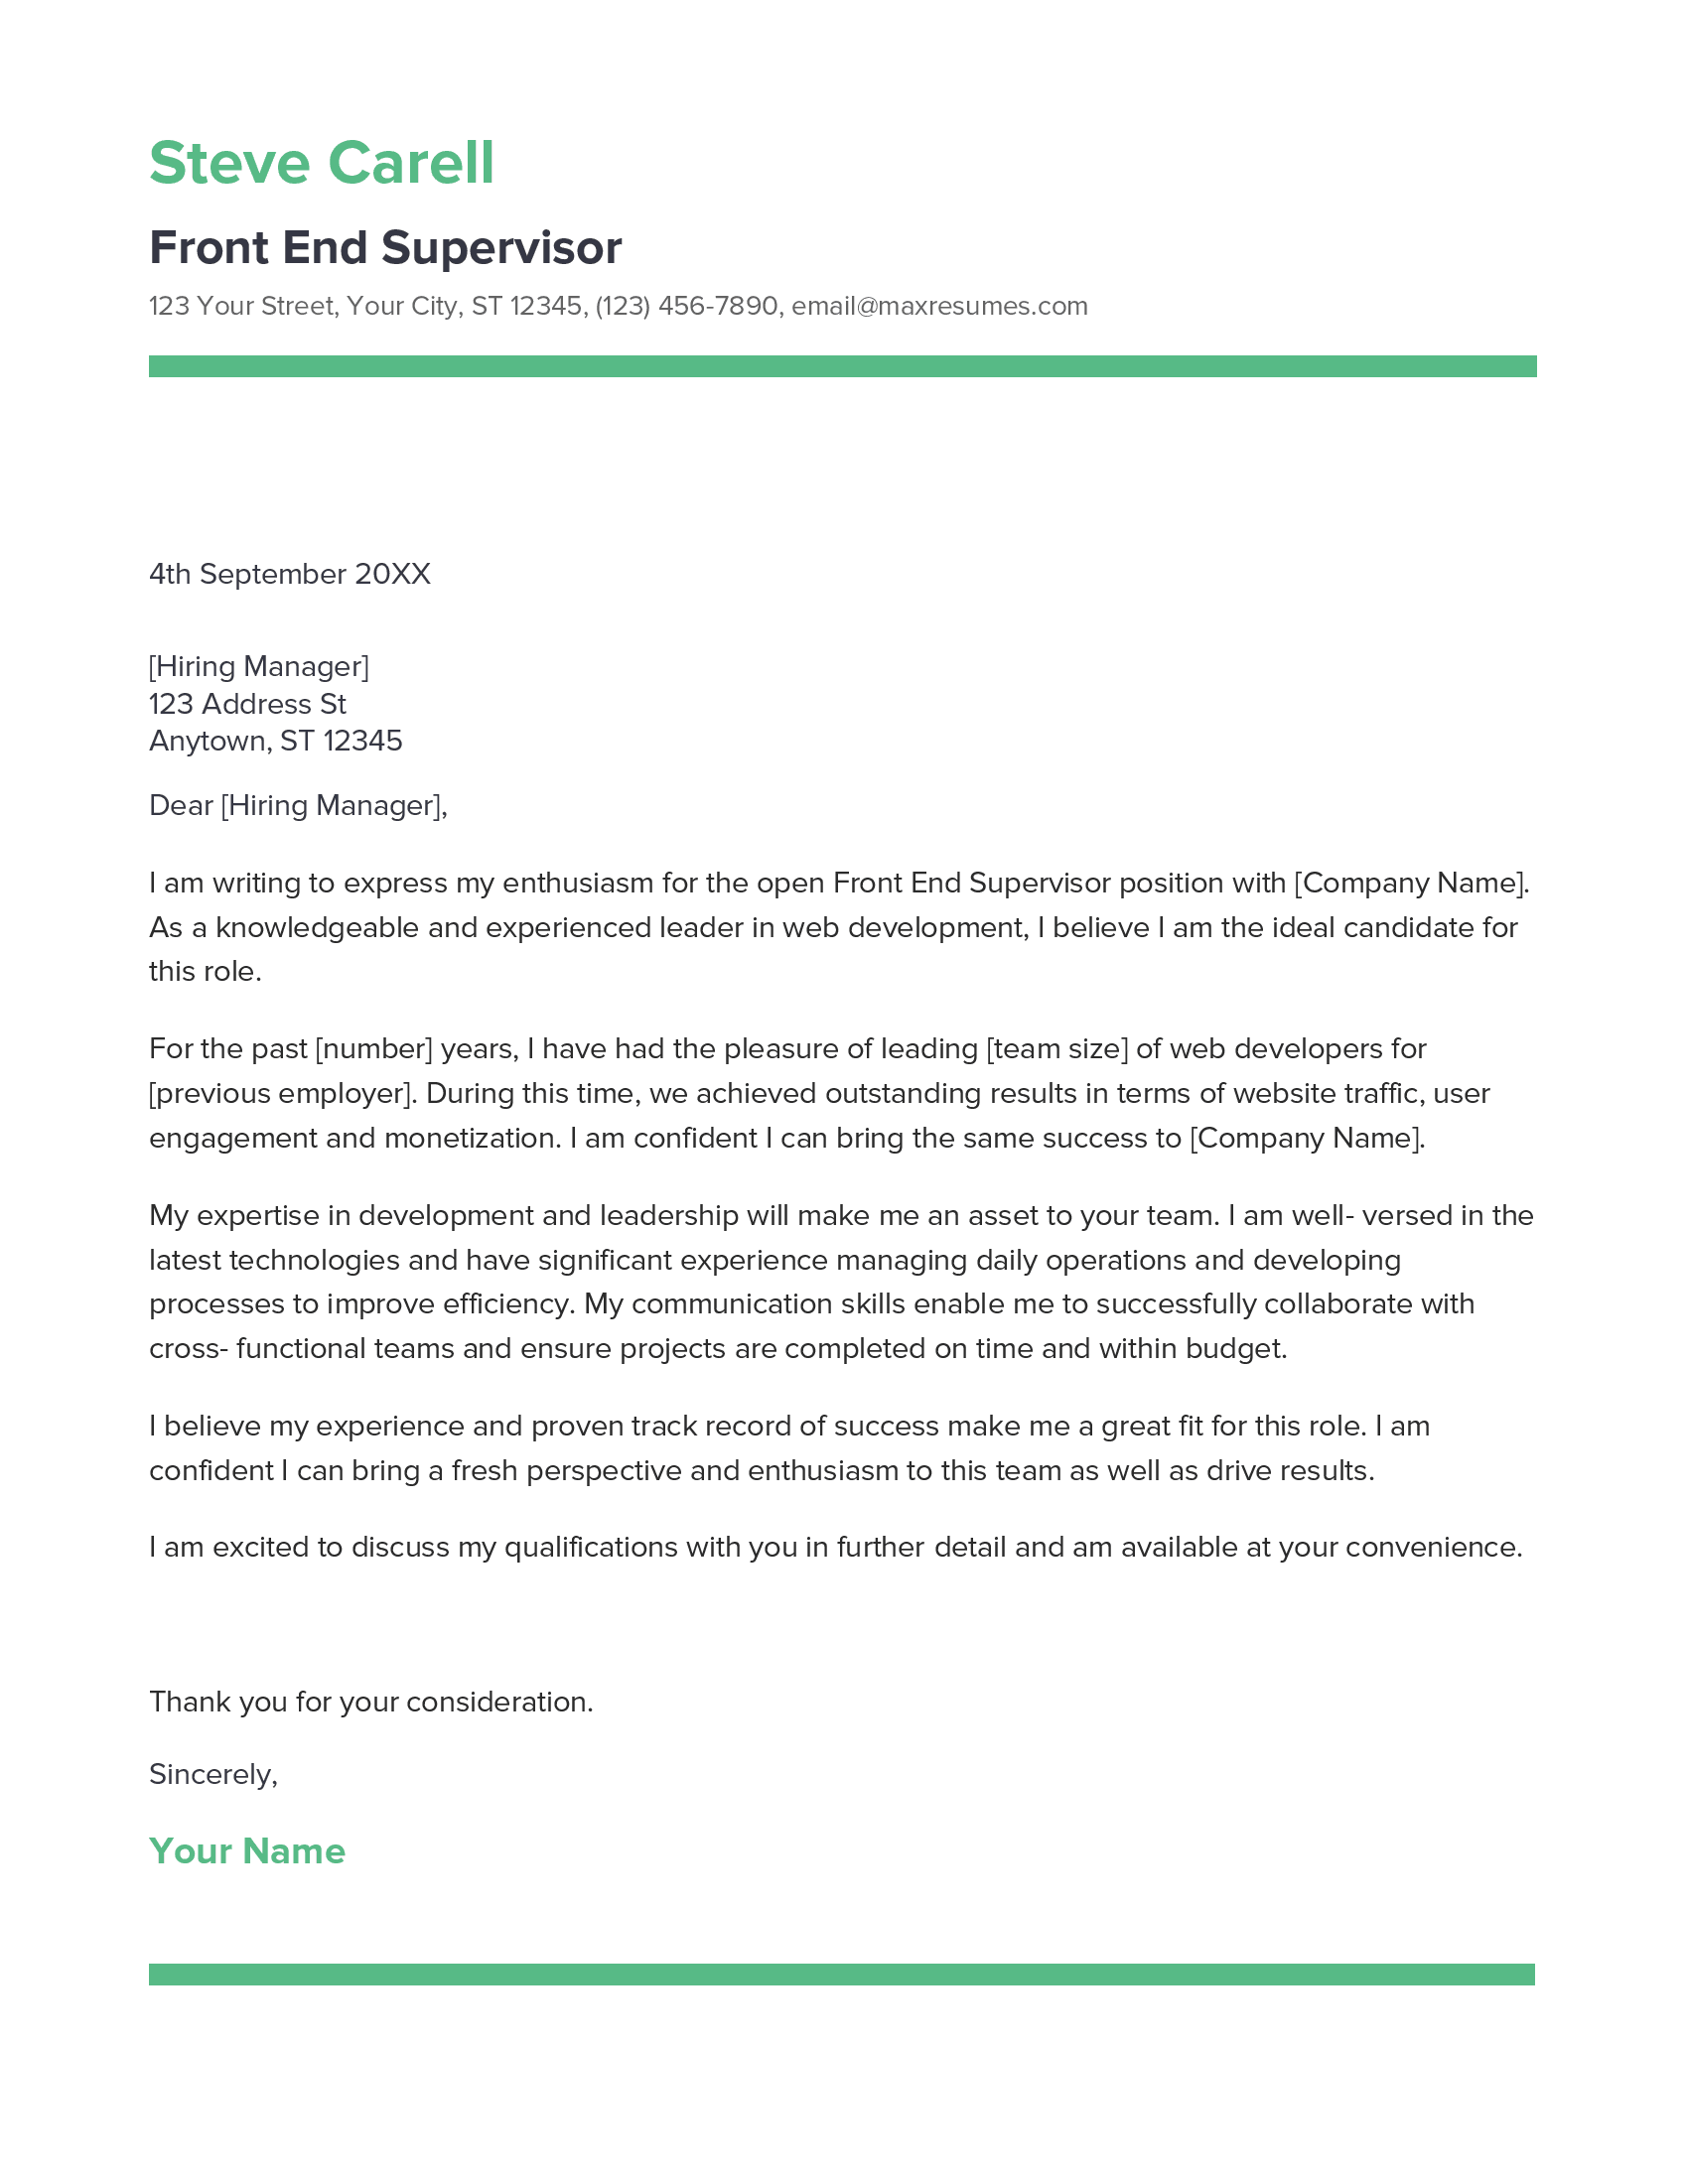 Front End Supervisor Cover Letter Example